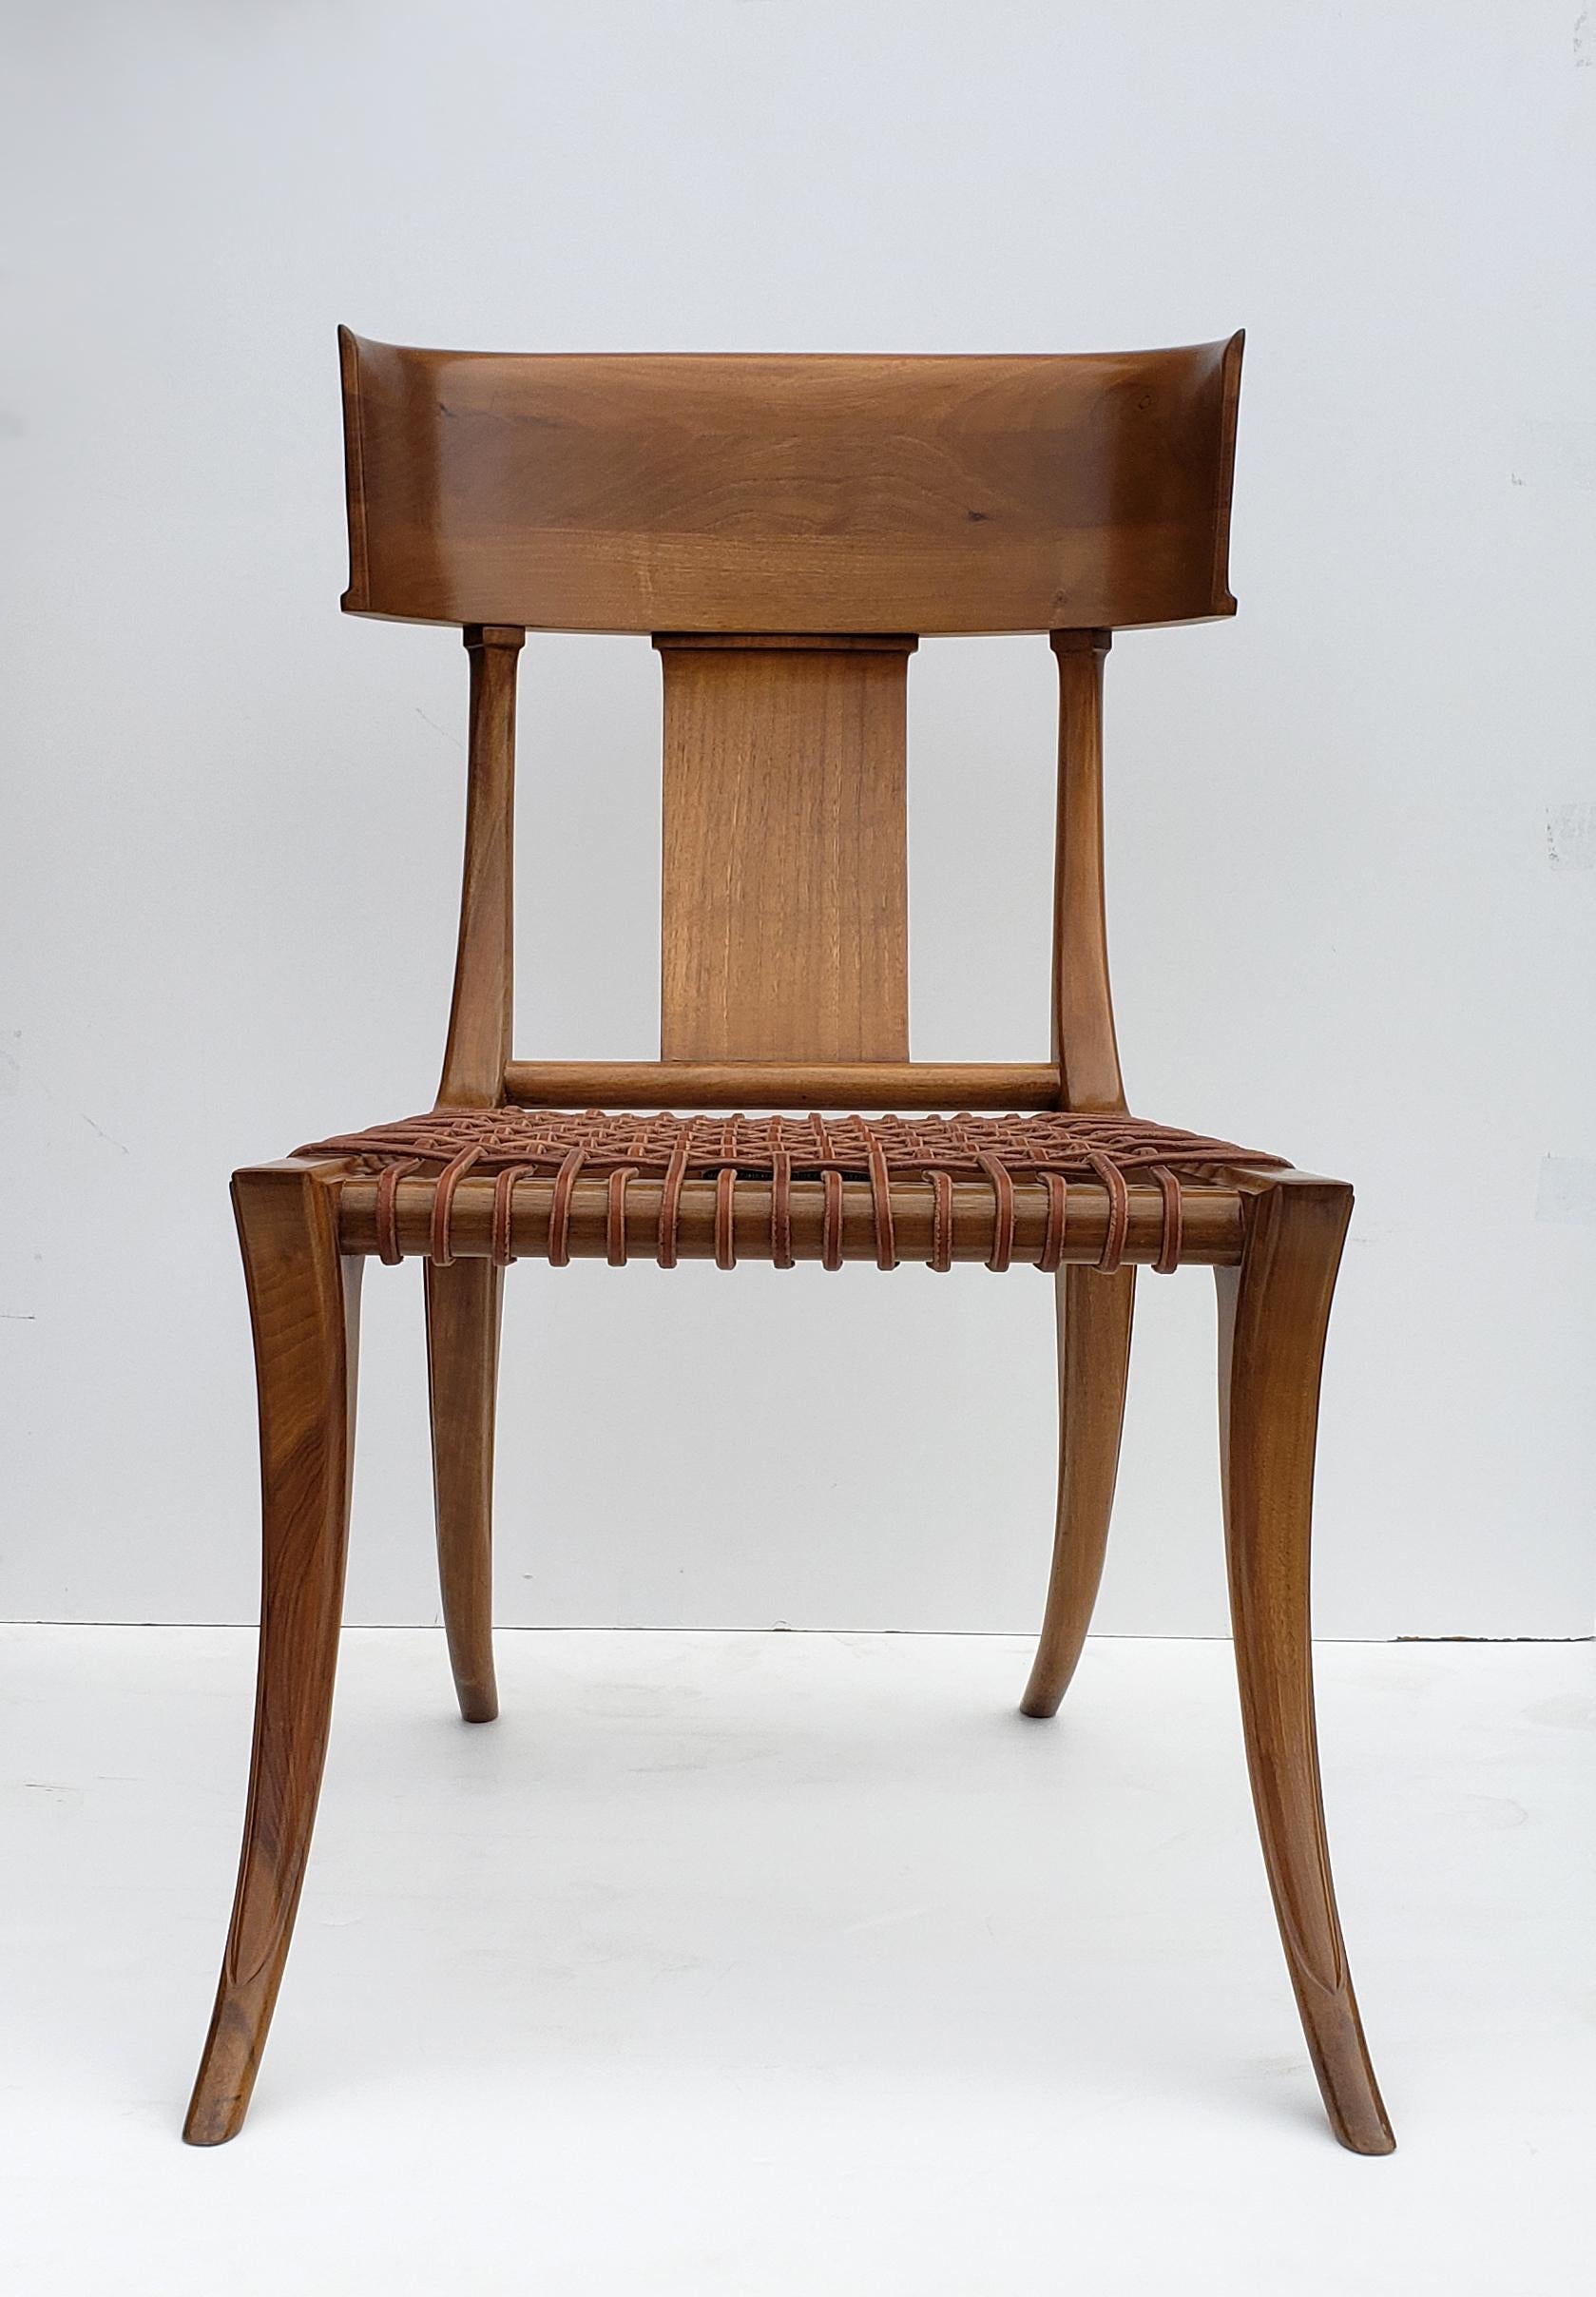 A masterpiece of 20th century design. The T.H. Robsjohn-Gibbings designed Klismos chair produced in Greece by Saridis of Athens. This example retains the original metal plaque and is stamped with a unique serial number by the manufacturer. Excellent